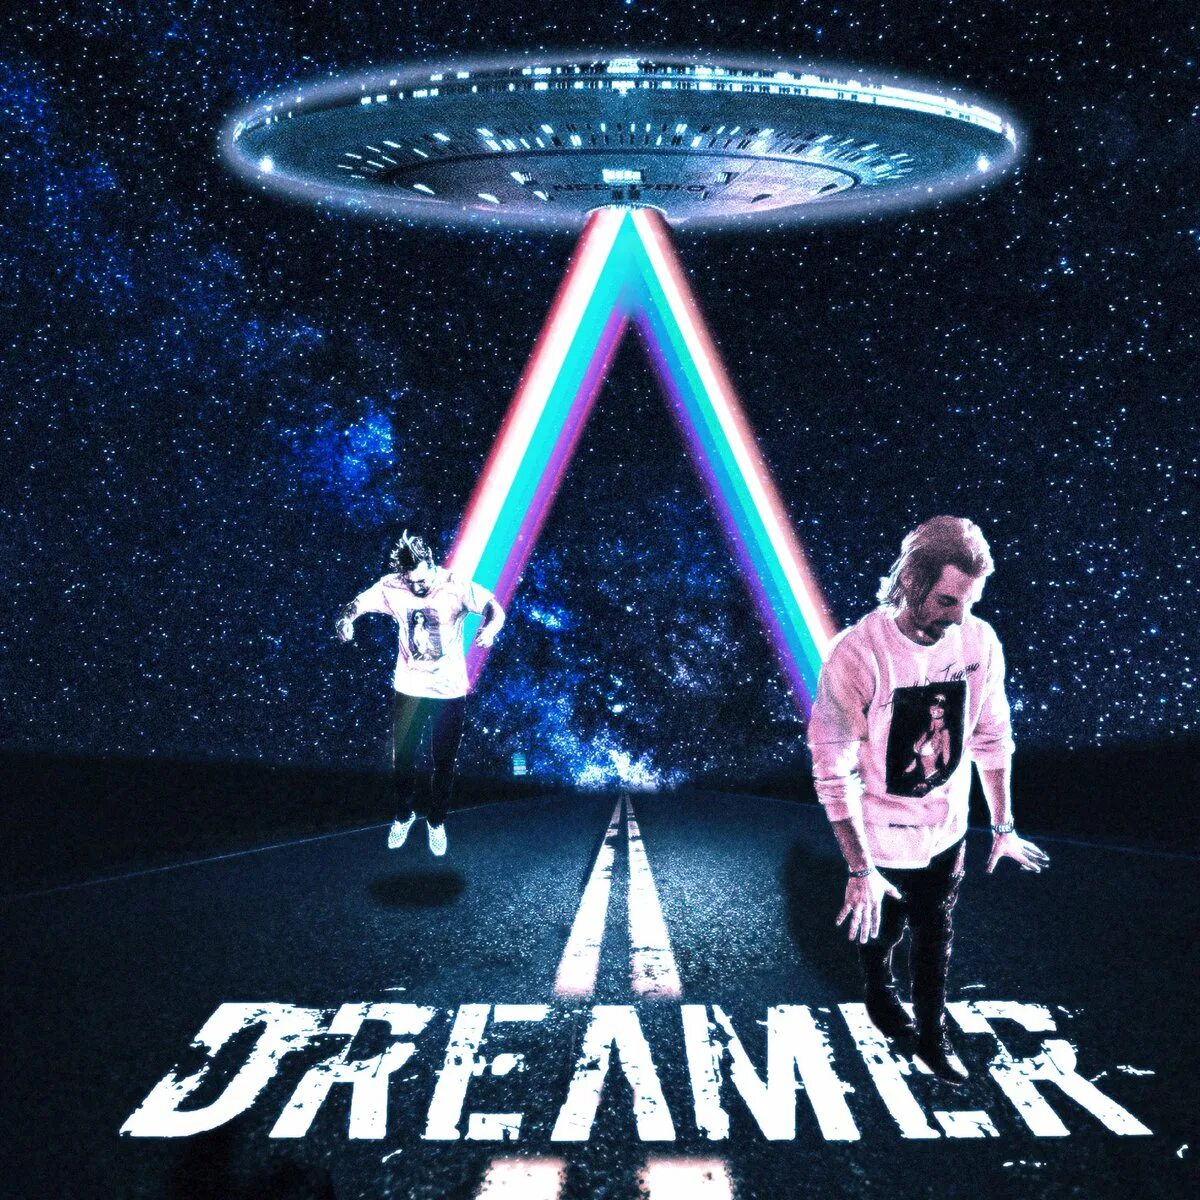 Axwell more than you. Axwell ingrosso Dreamer. Renegade Axwell /\ ingrosso. Axwell ingrosso Sigala Dreamer. Axwell ingrosso thinking about you.